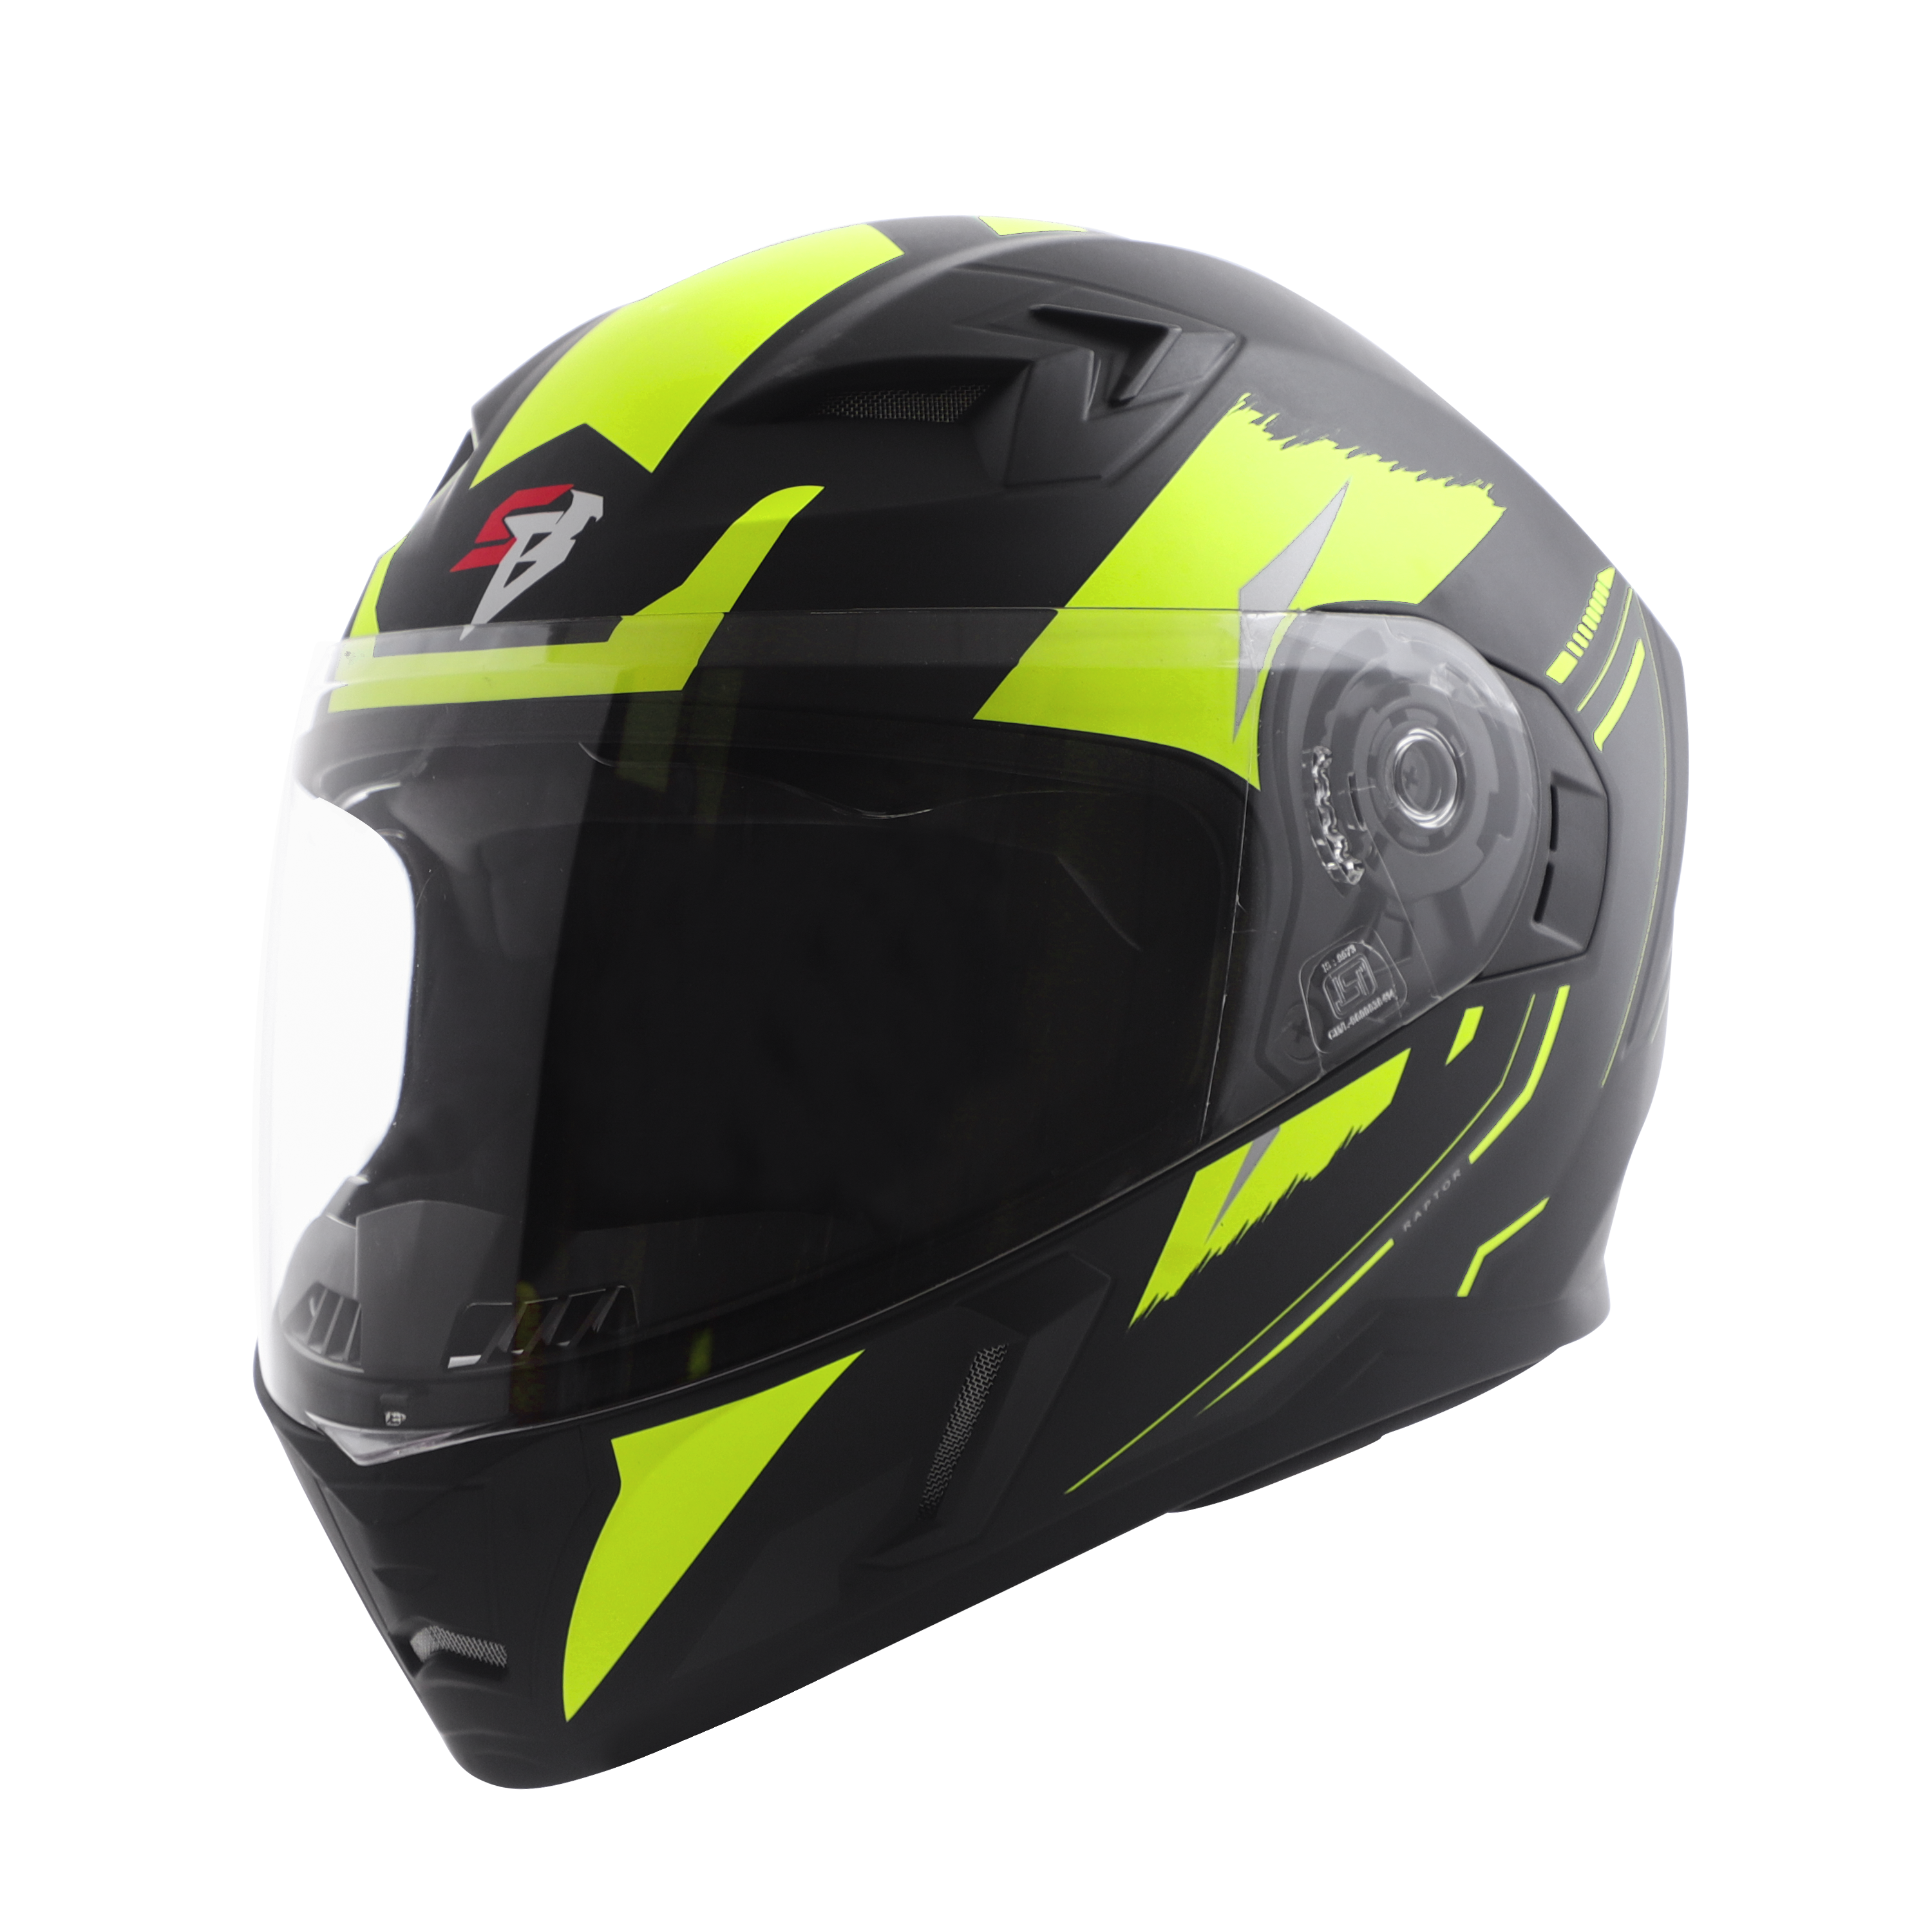 SBA-21 AIR (SV) GLOSSY BLACK WITH NEON WITH LONG CHEEK PAD INTERIOR